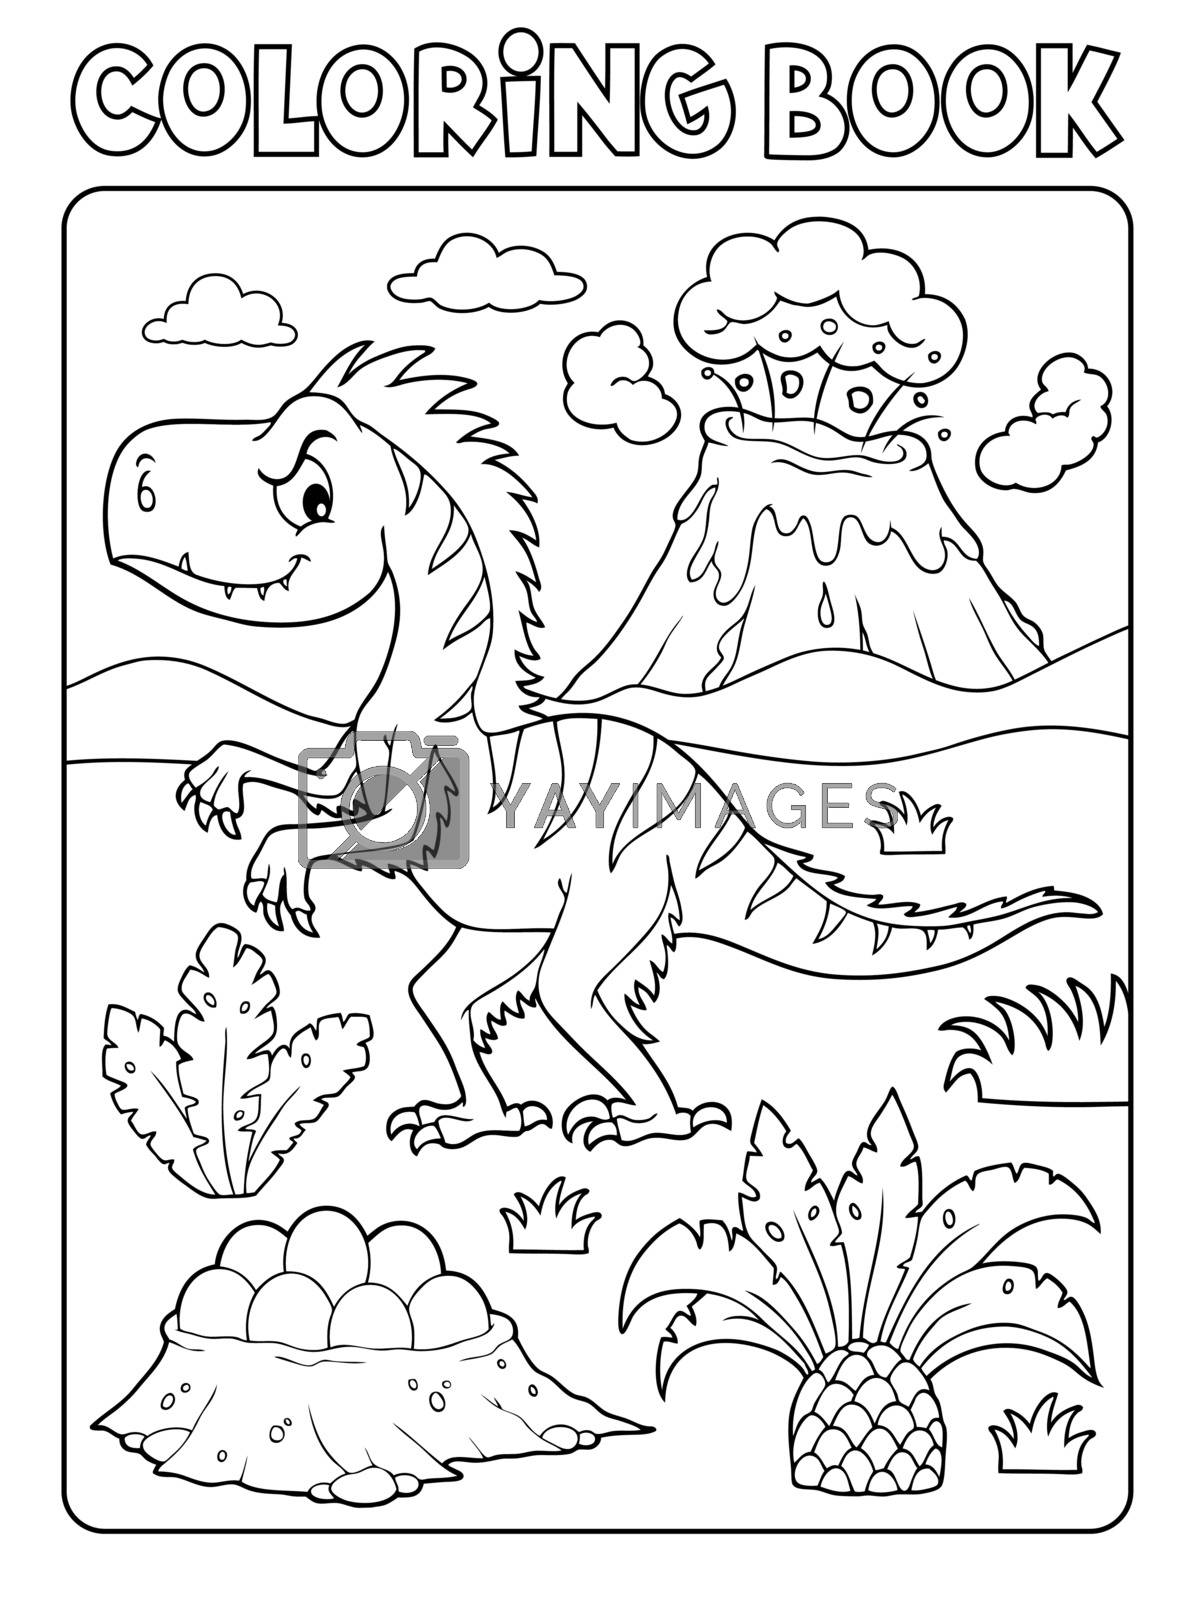 Royalty free image of Coloring book dinosaur composition image 4 by clairev